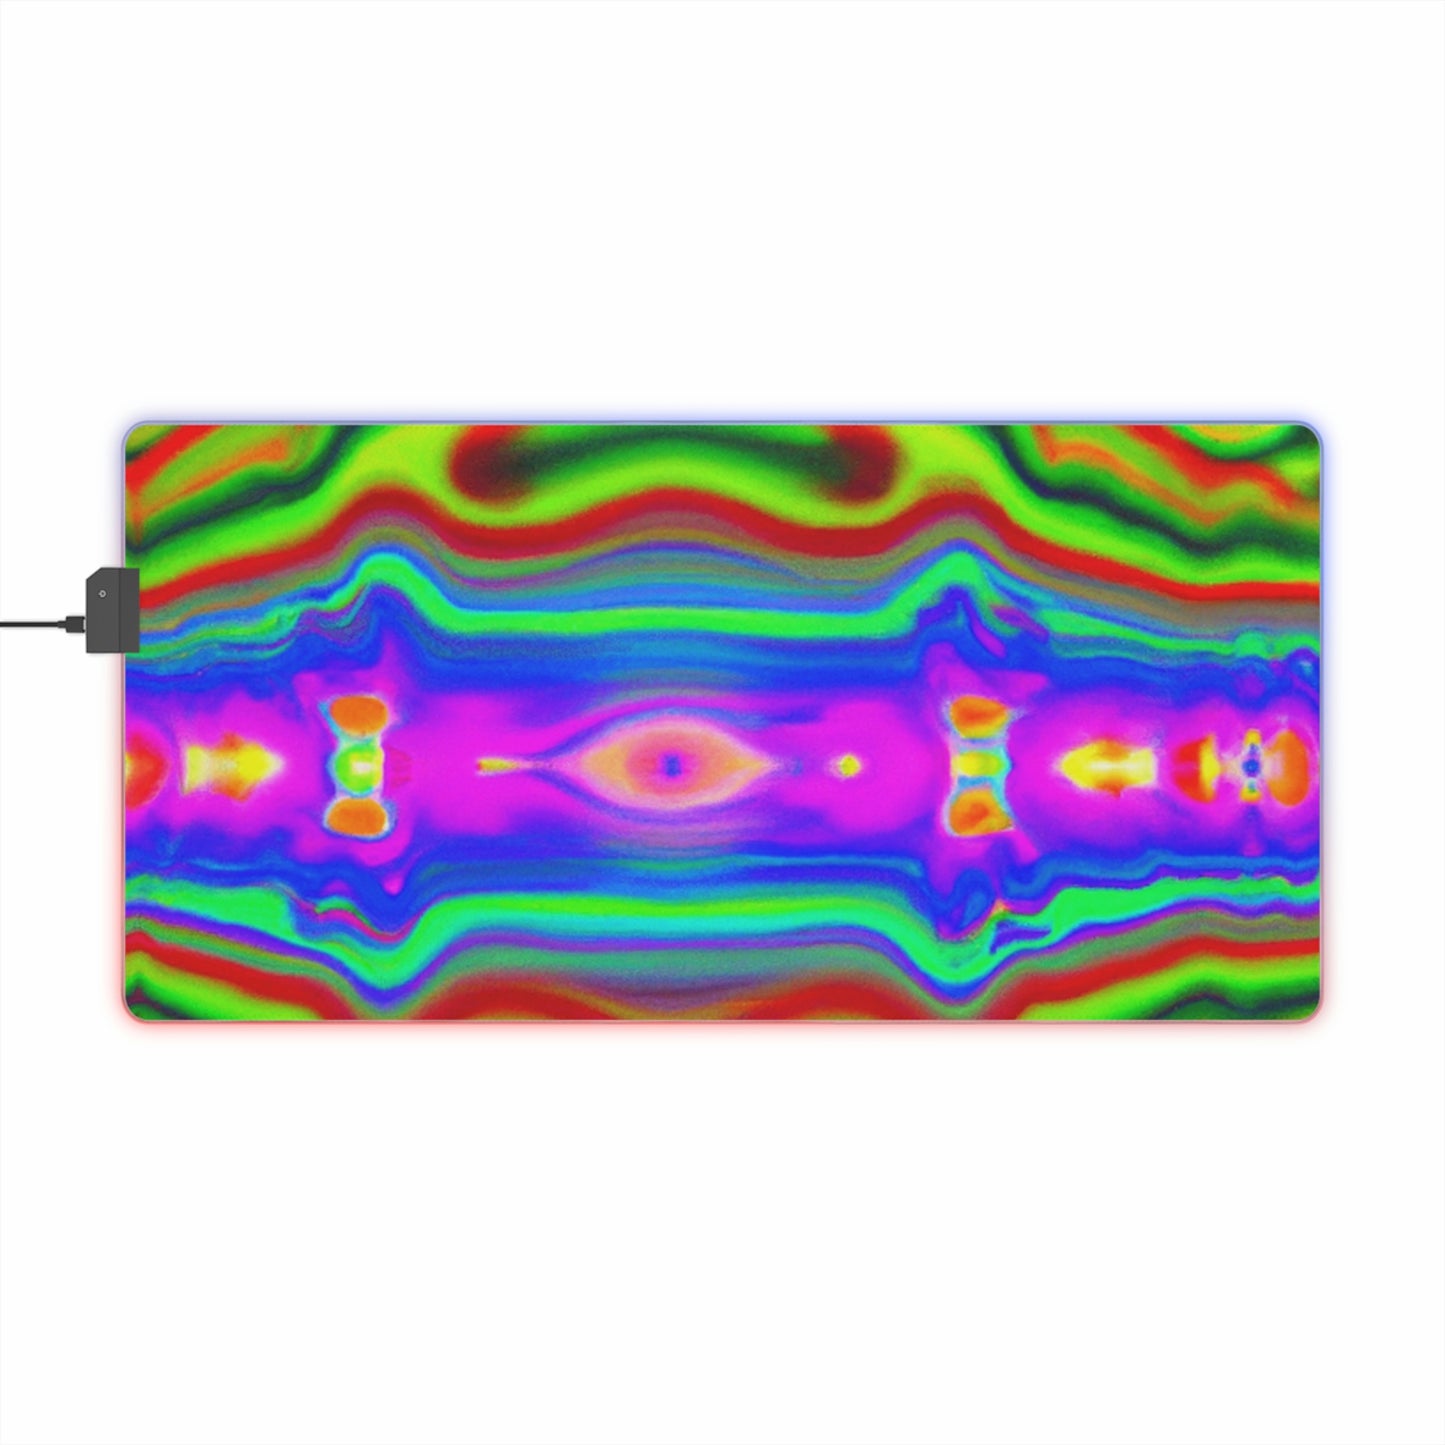 Danny "Sonic Switchblade" Miller - Psychedelic Trippy LED Light Up Gaming Mouse Pad